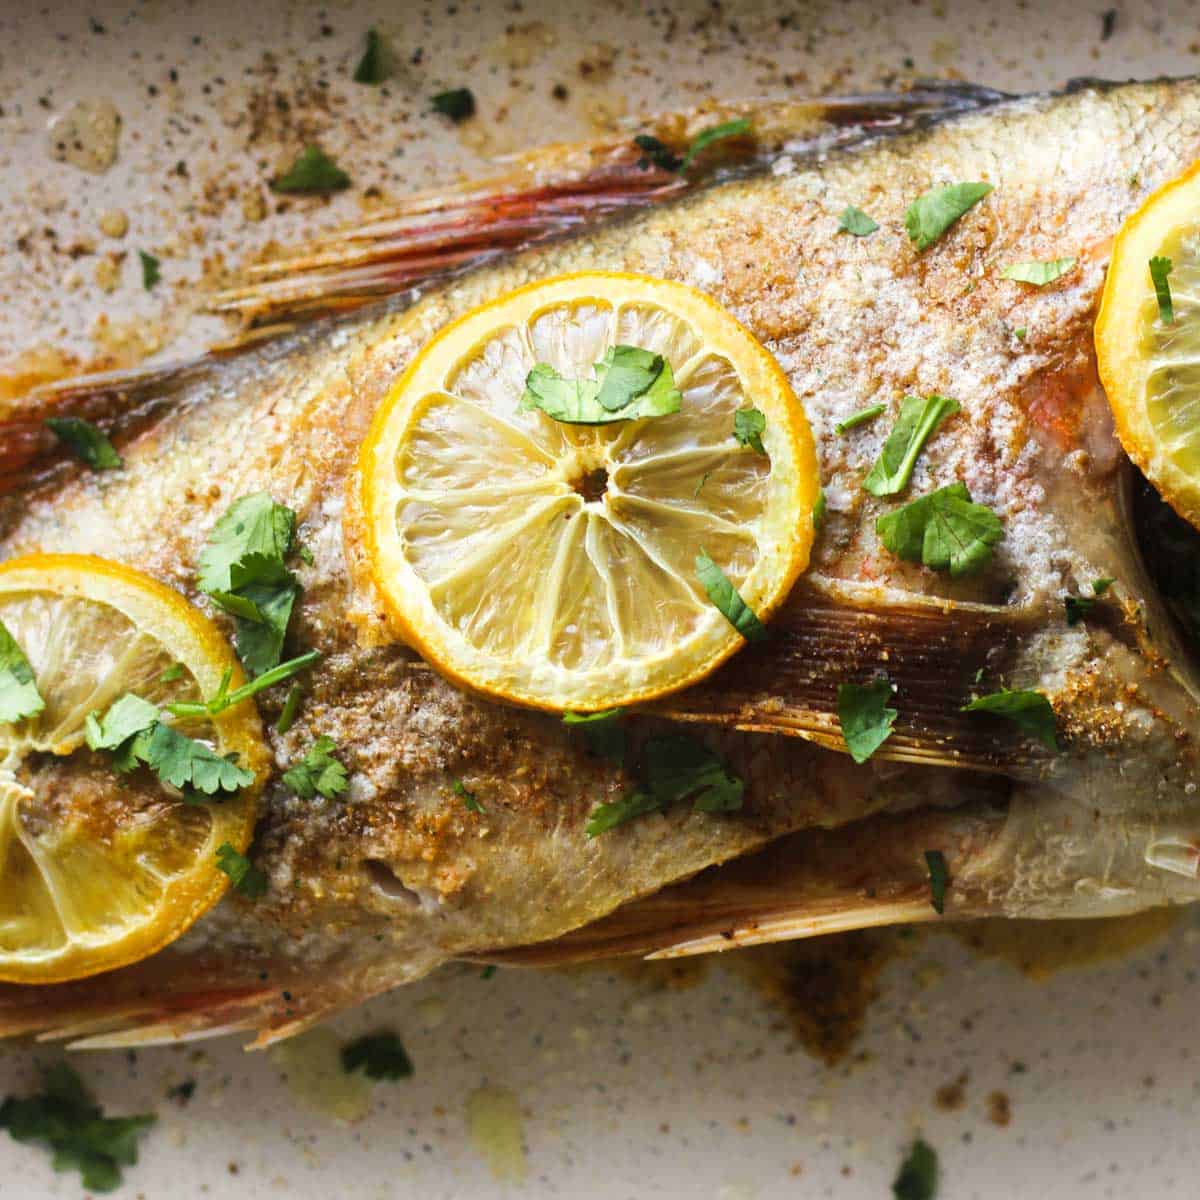 oven baked rockfish with old bay seasoning, lemon and chopped cilantro